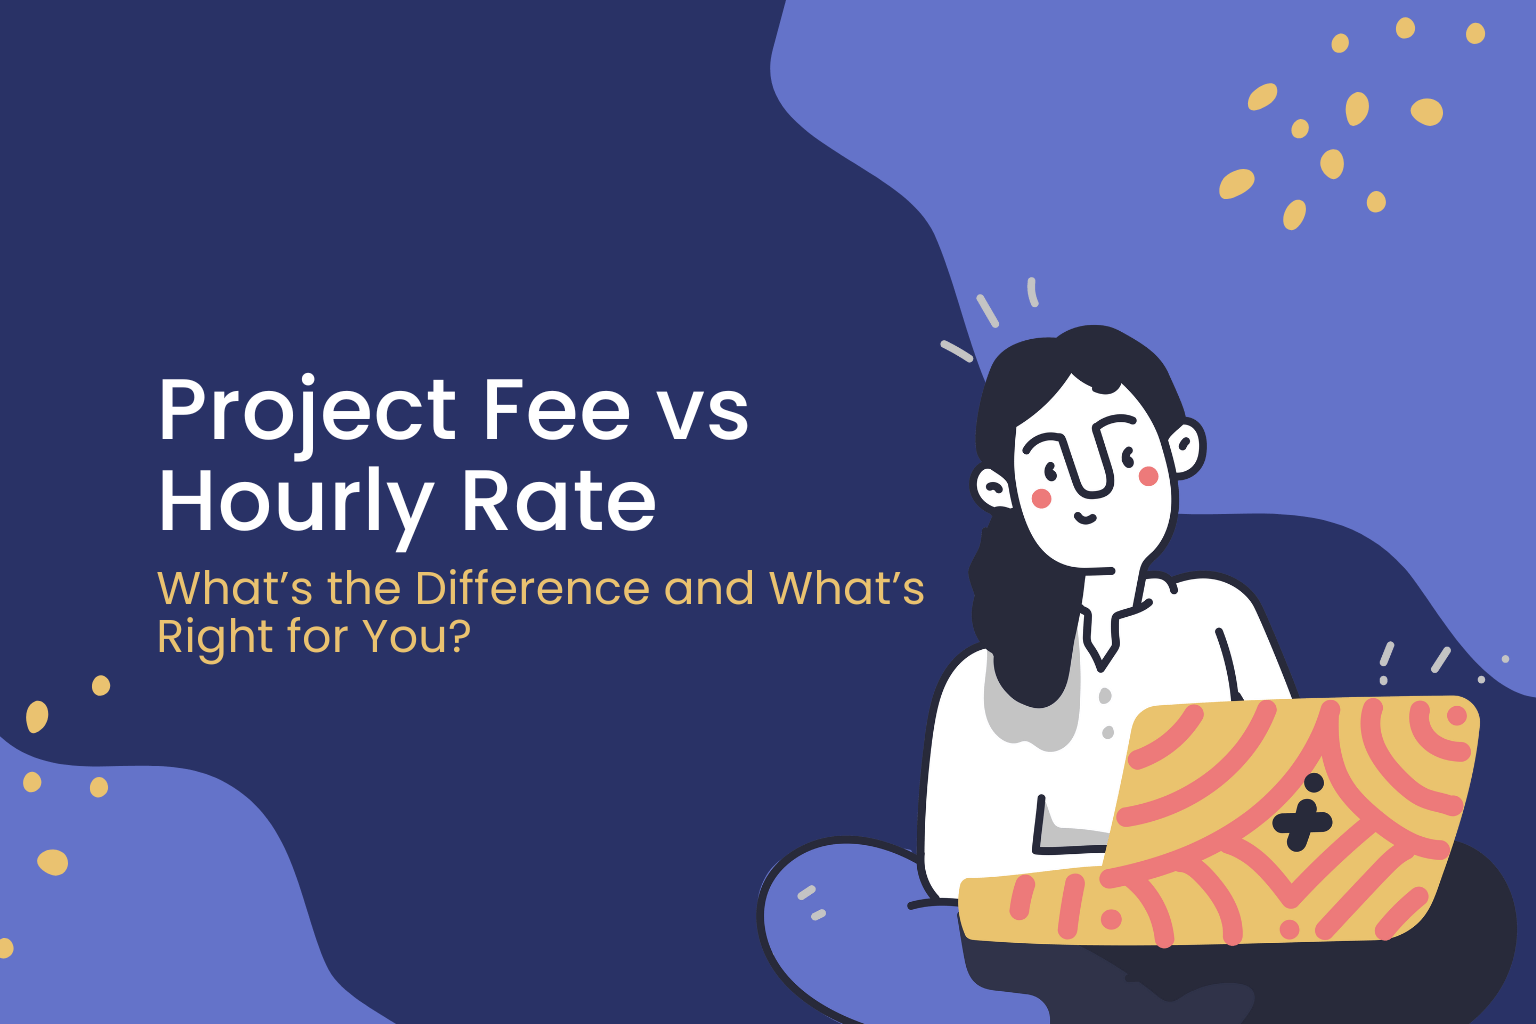 Project Fee vs Hourly Rate – What’s the Difference and What’s Right for You?